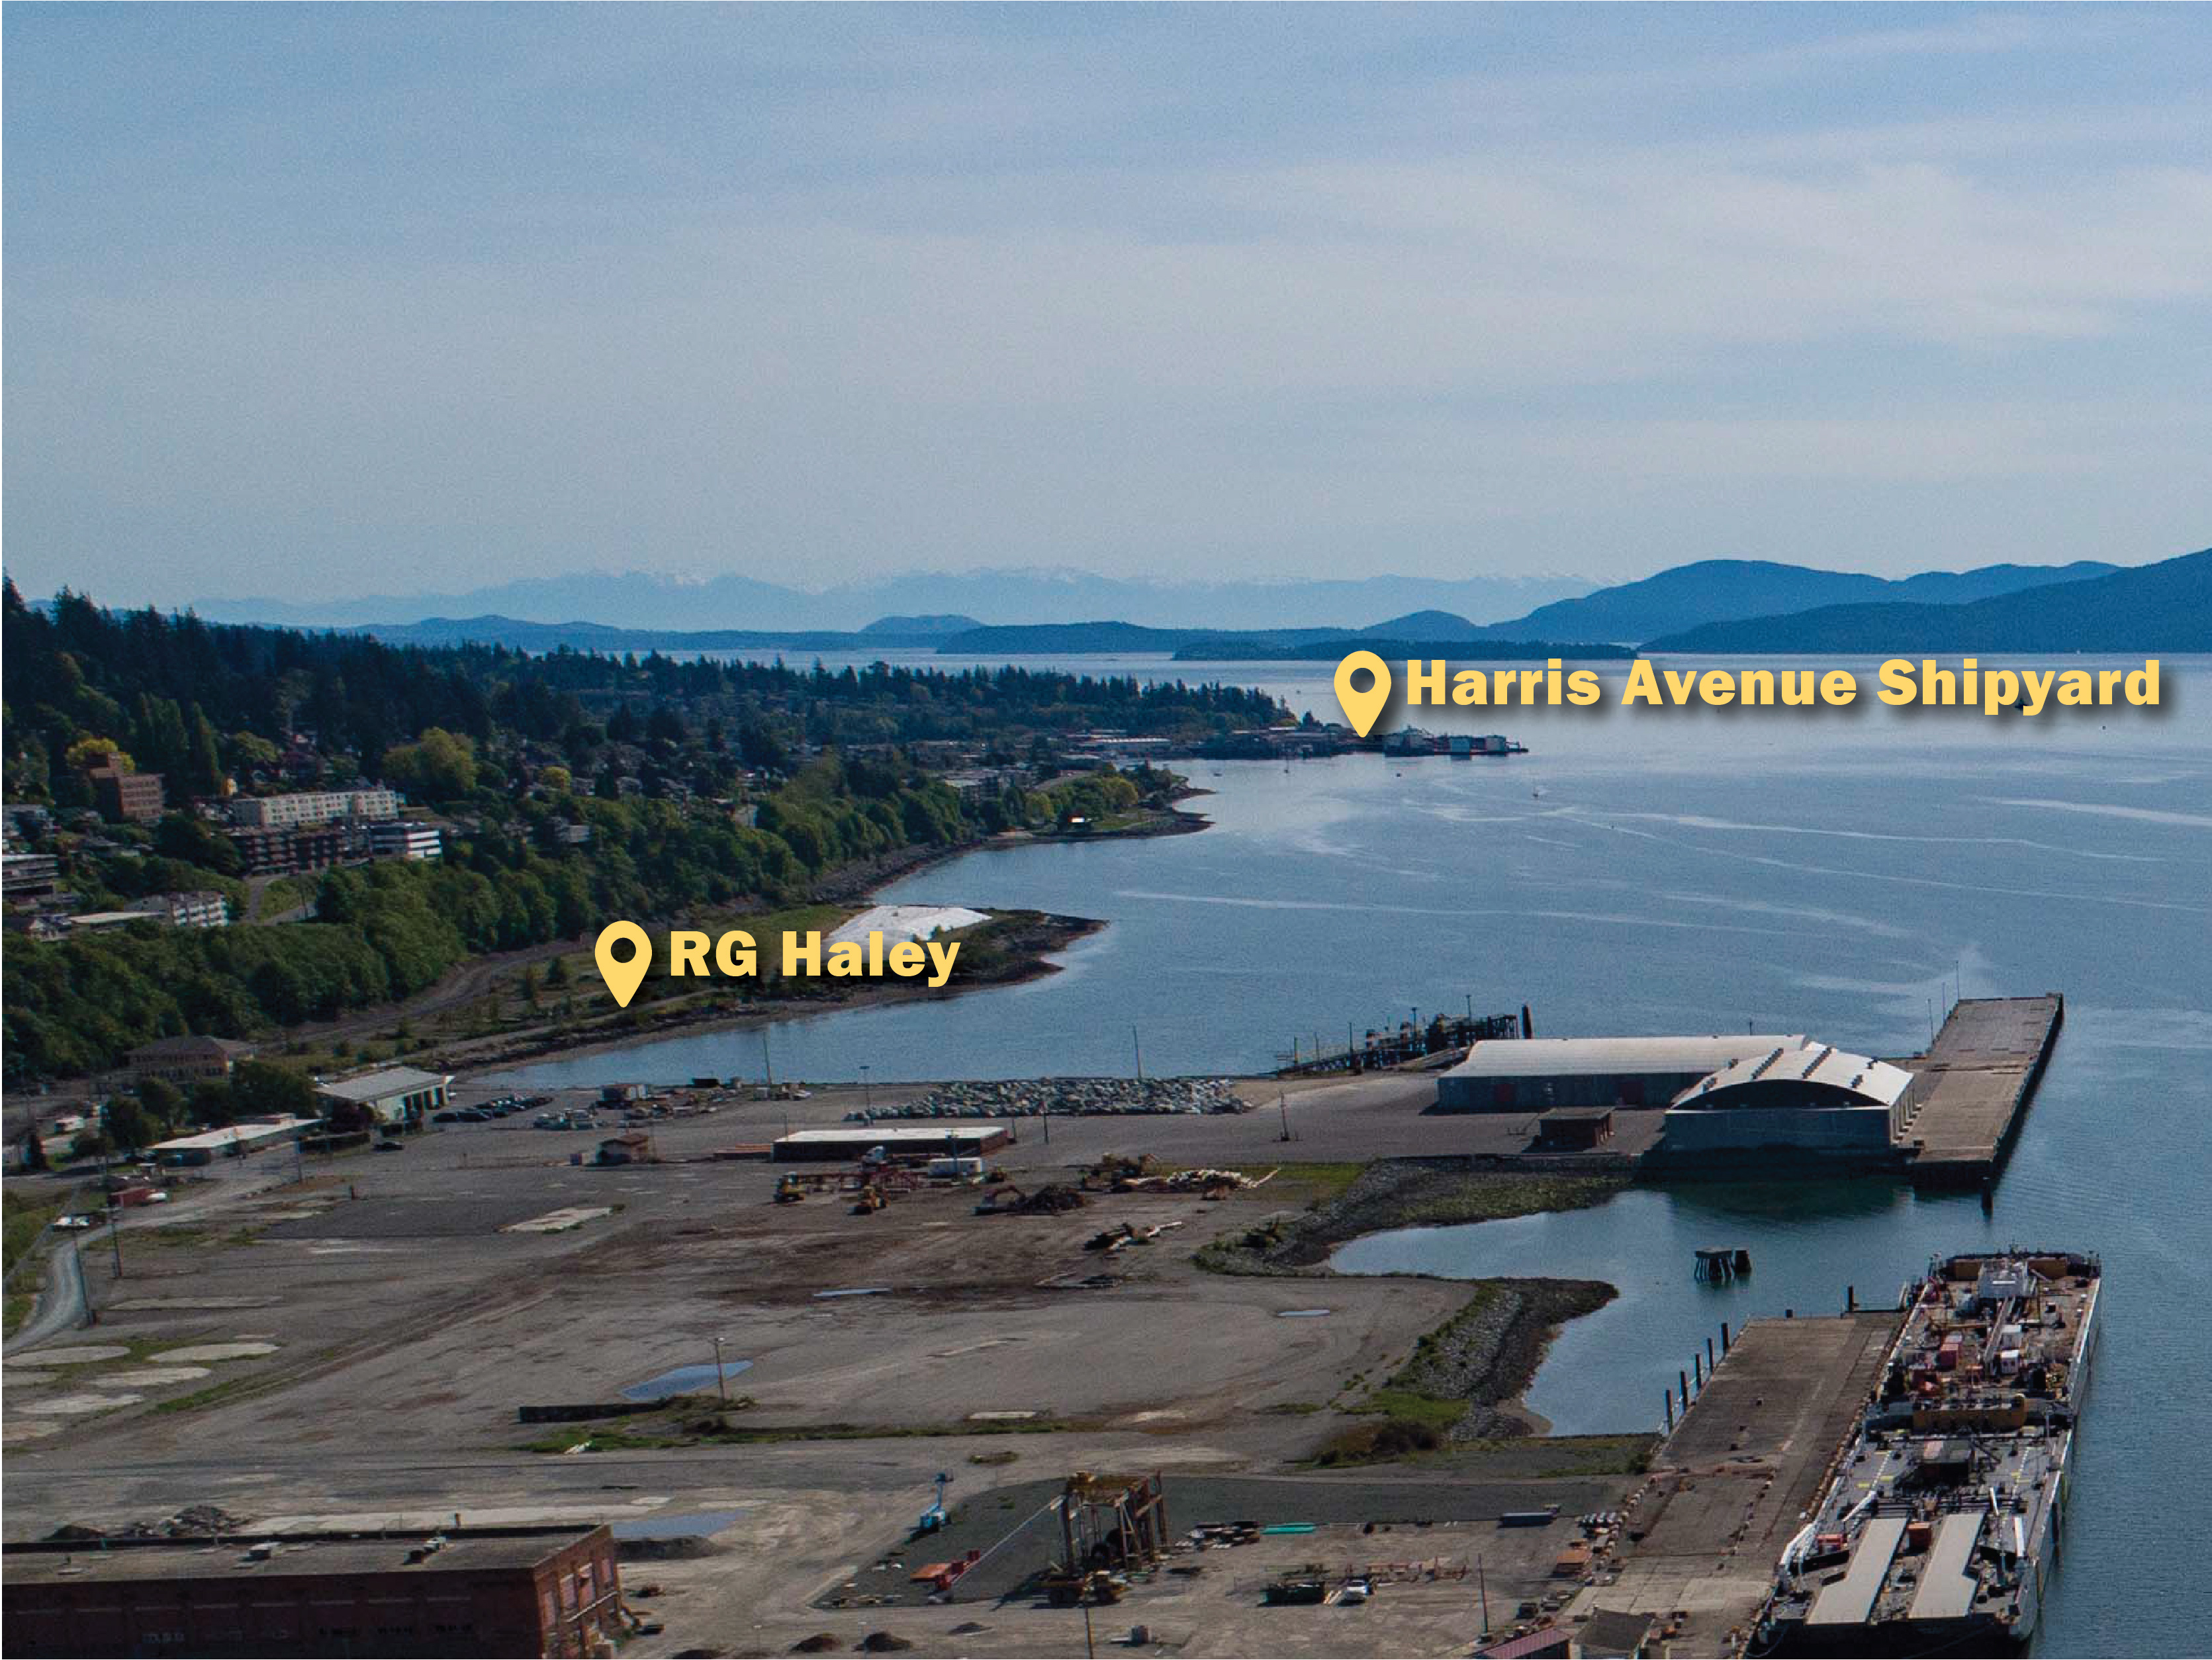 Bellingham waterfront from drone with RG Haley and Harris Ave Shipyard labeld